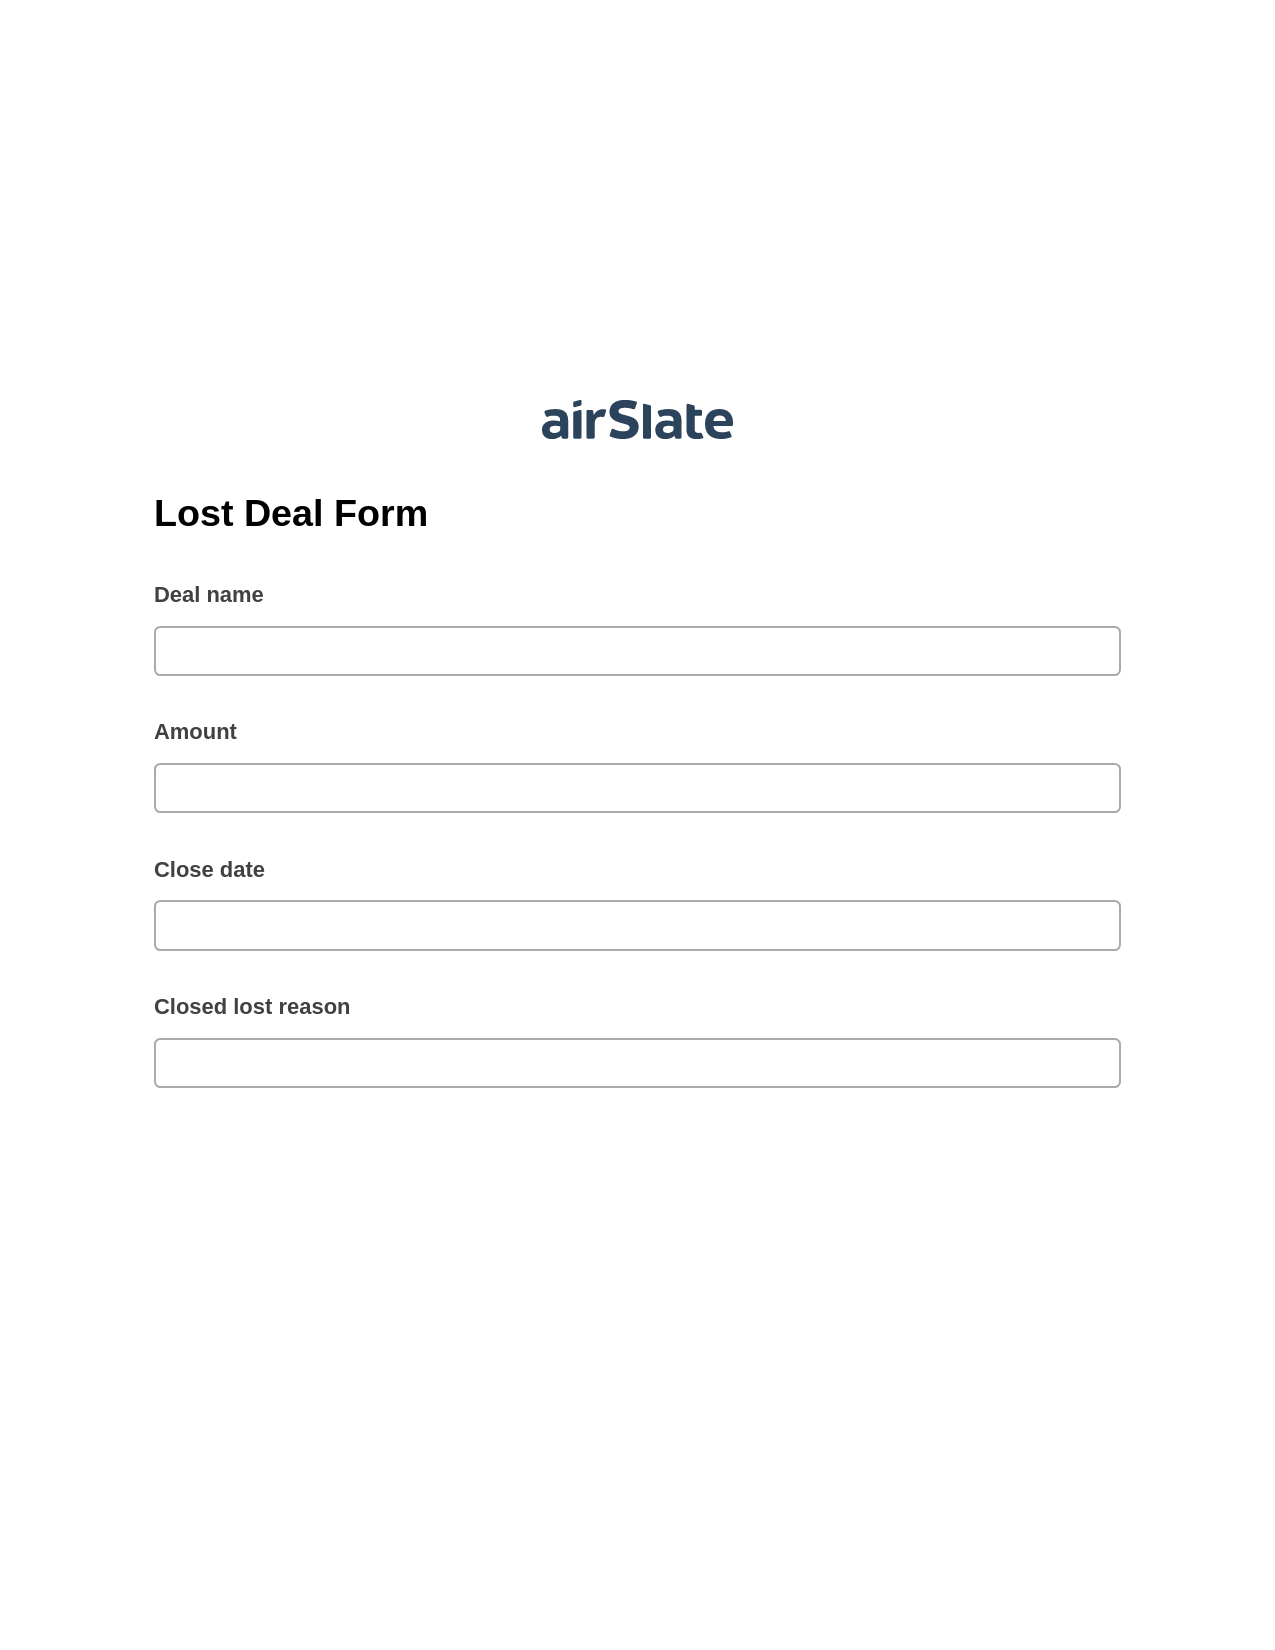 Lost Deal Form Pre-fill from Salesforce Records with SOQL Bot, Webhook Bot, Archive to Dropbox Bot